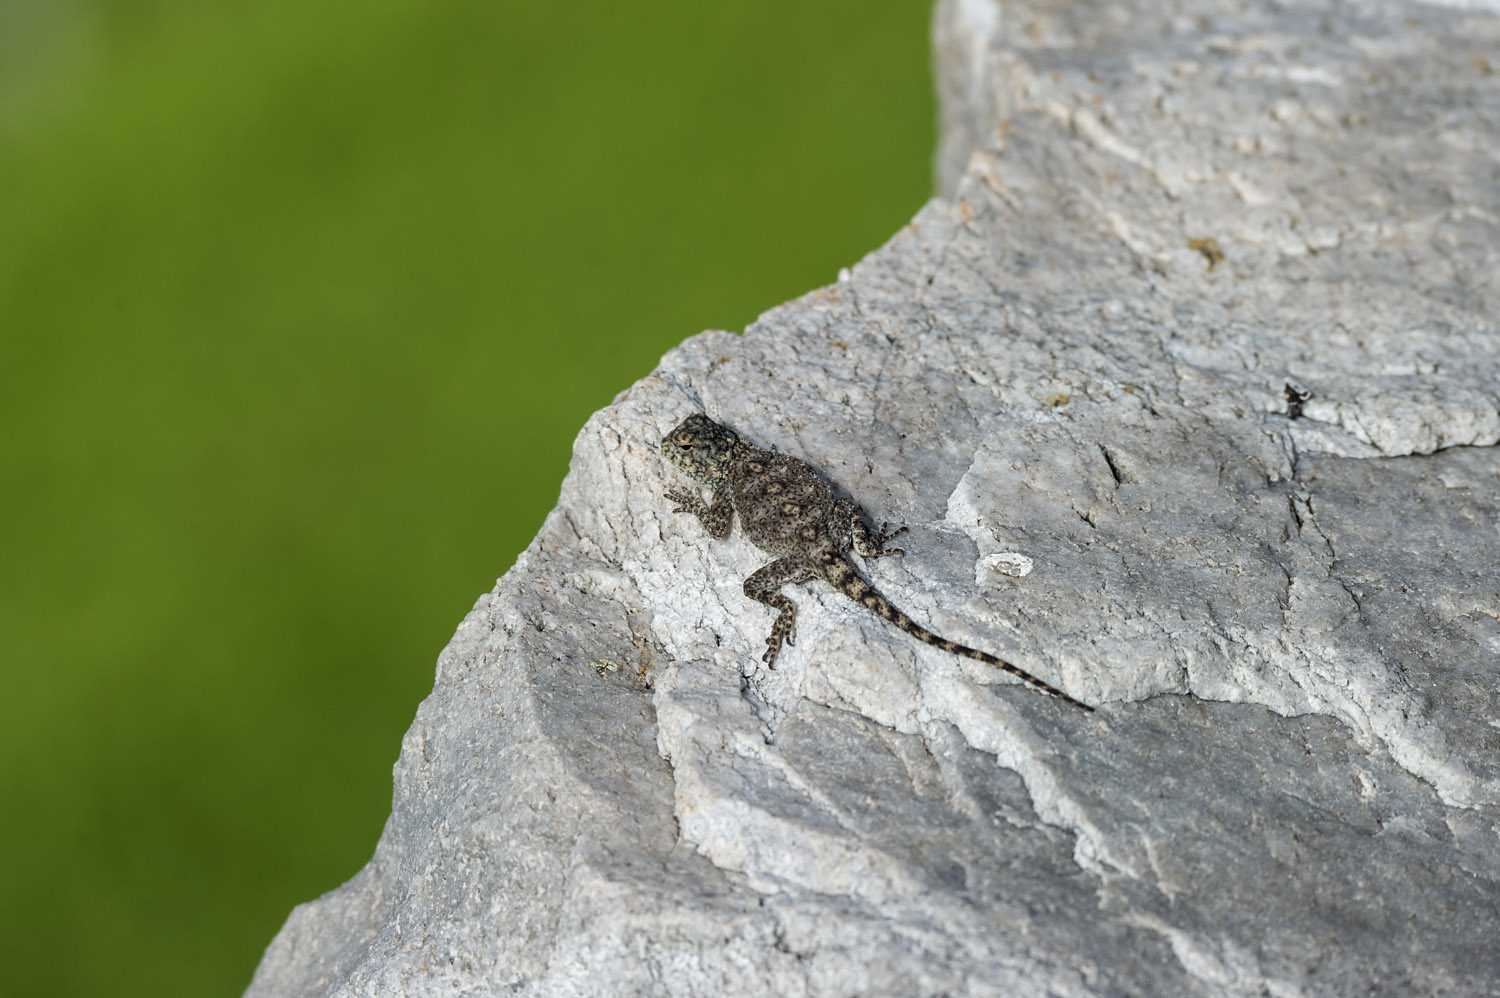 Southern Rock Agama or Knobel's Agama